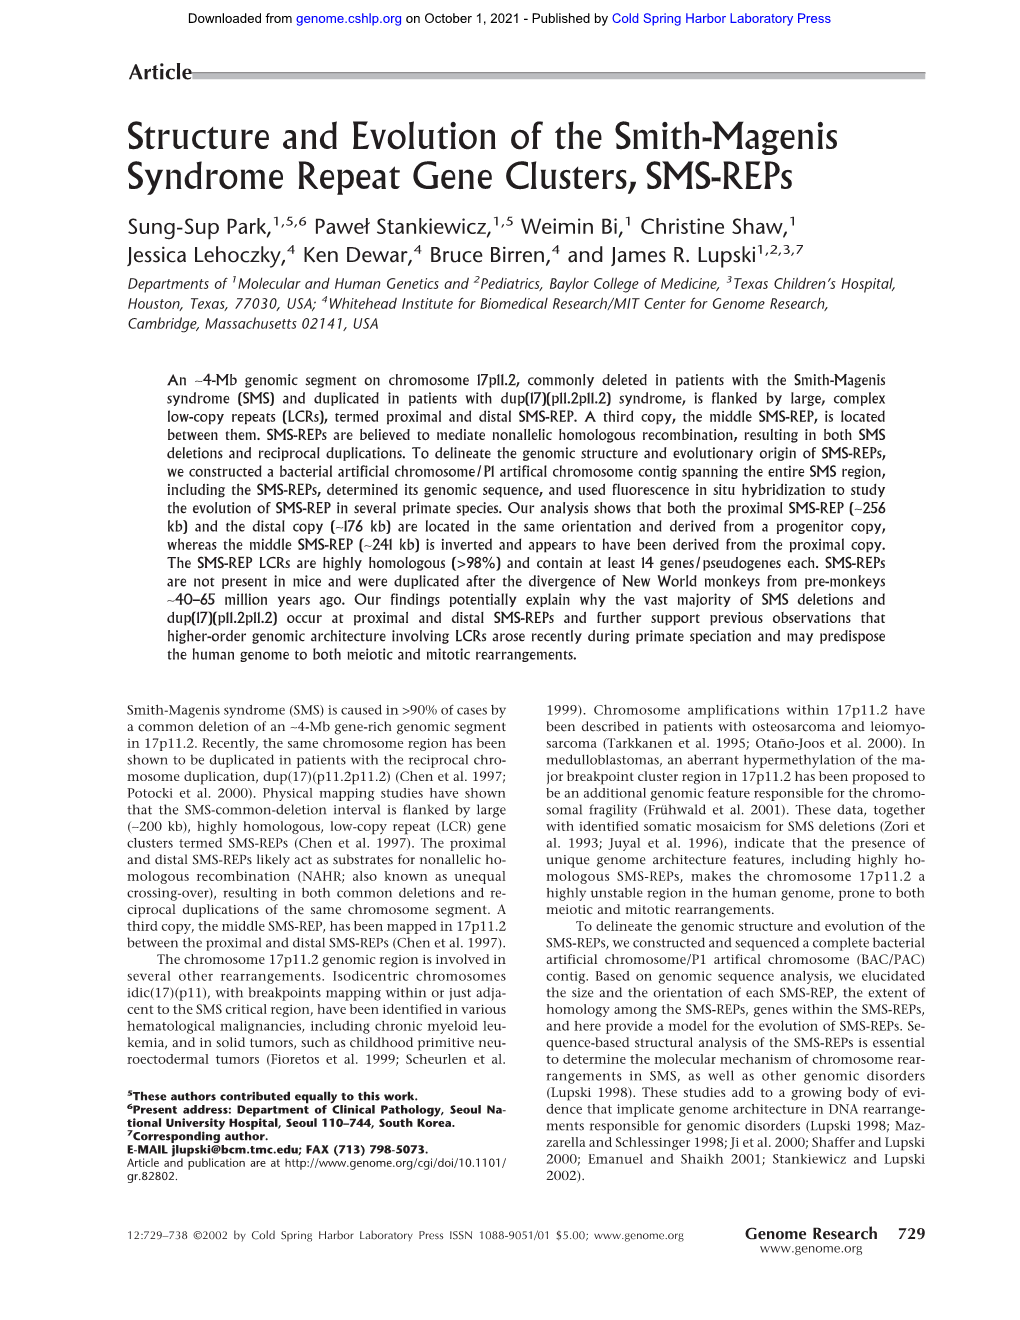 Structure and Evolution of the Smith-Magenis Syndrome Repeat Gene Clusters, SMS-Reps